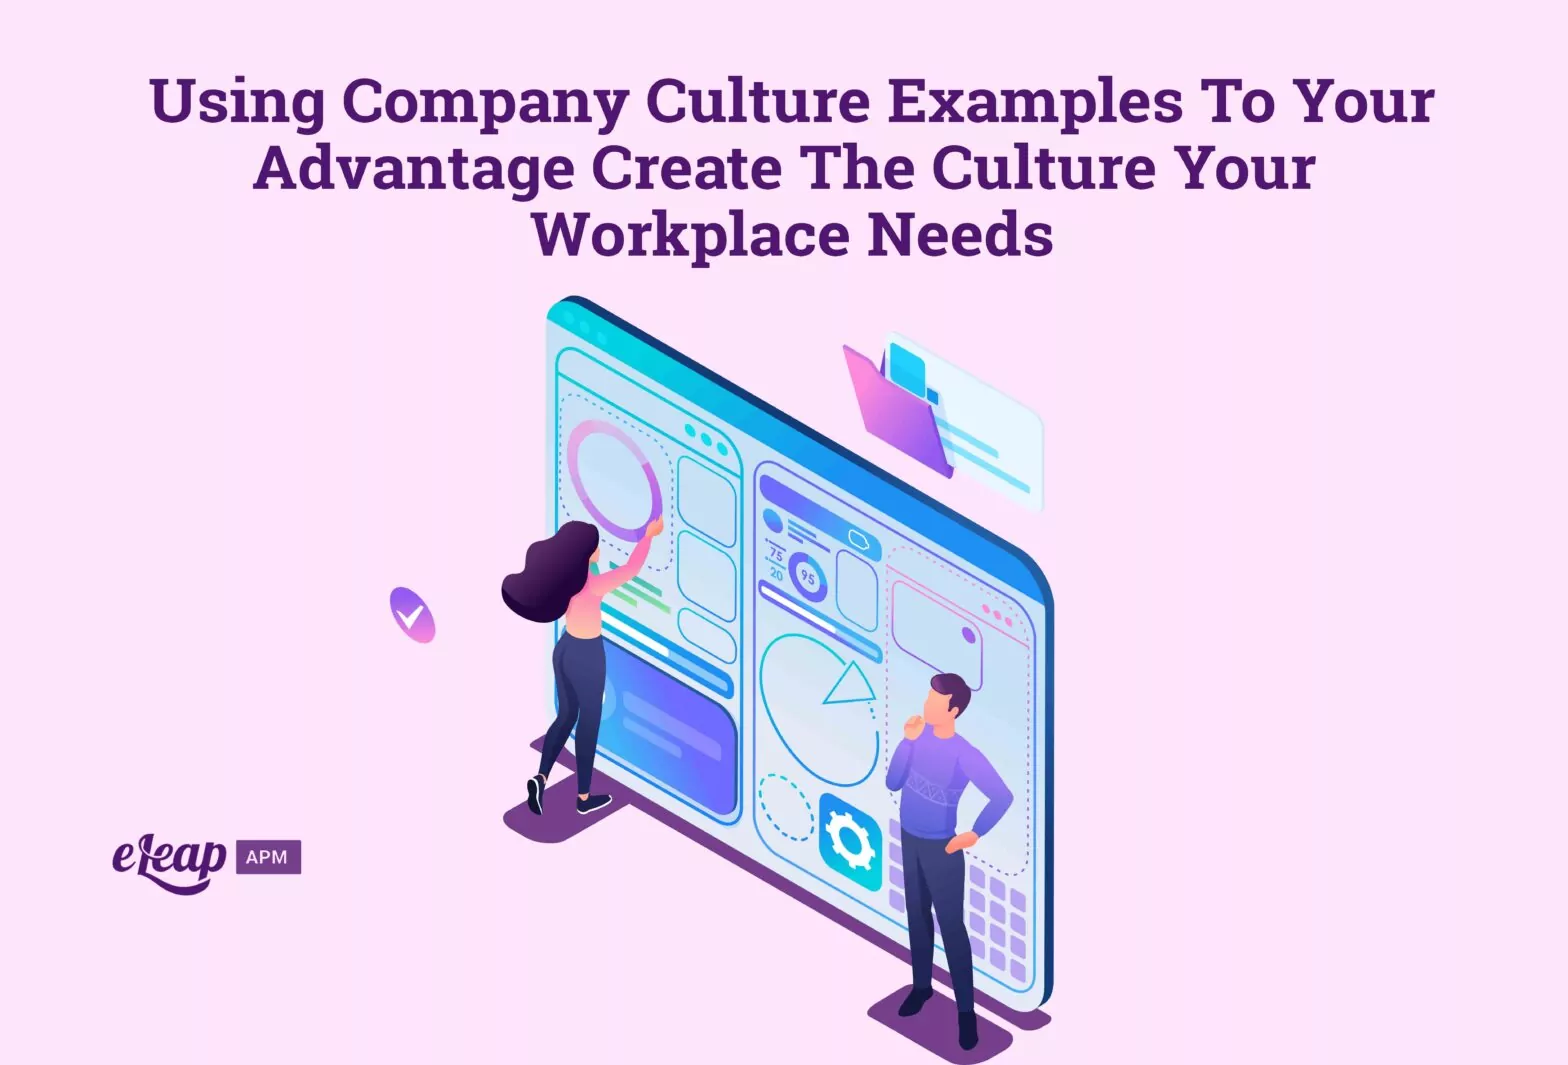 Using Company Culture Examples to Your Advantage – Create the Culture Your Workplace Needs